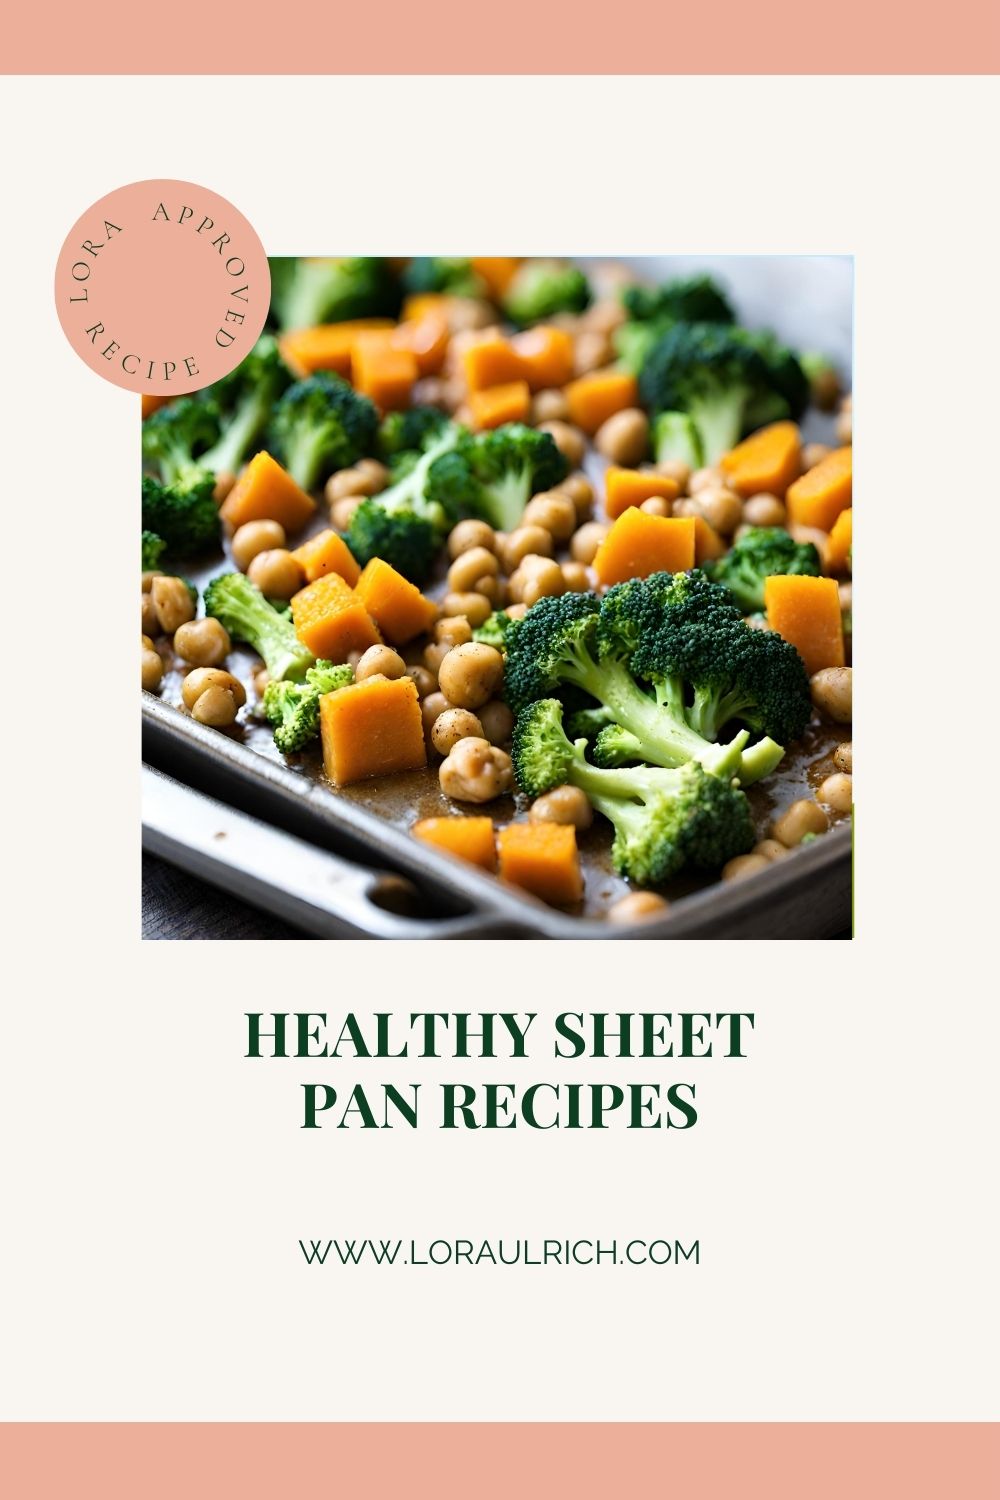 chickpeas, broccoli, and butternut squash as part of a healthy sheet pan recipe